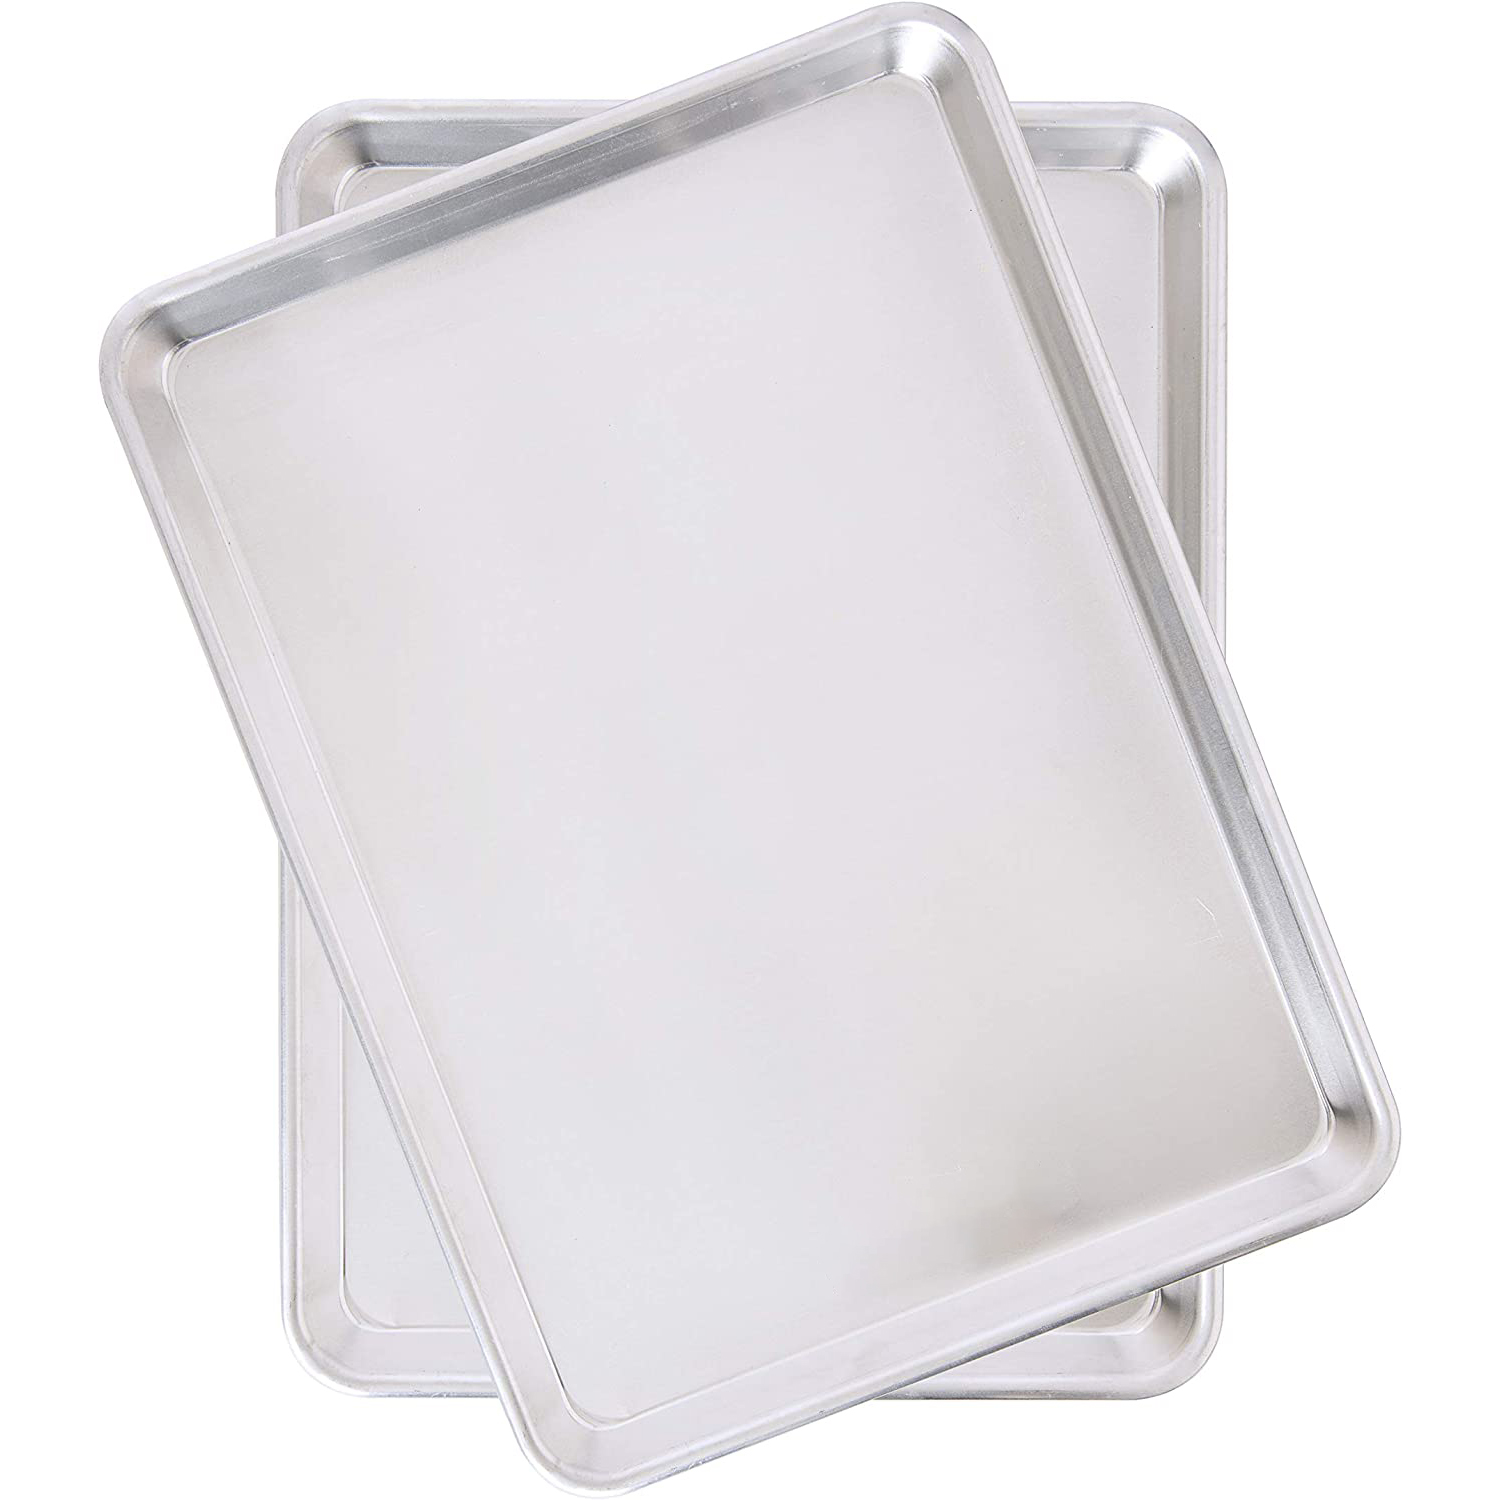 Stainless Steel Cookie Sheet Baking Pan Oven Tray Commercial